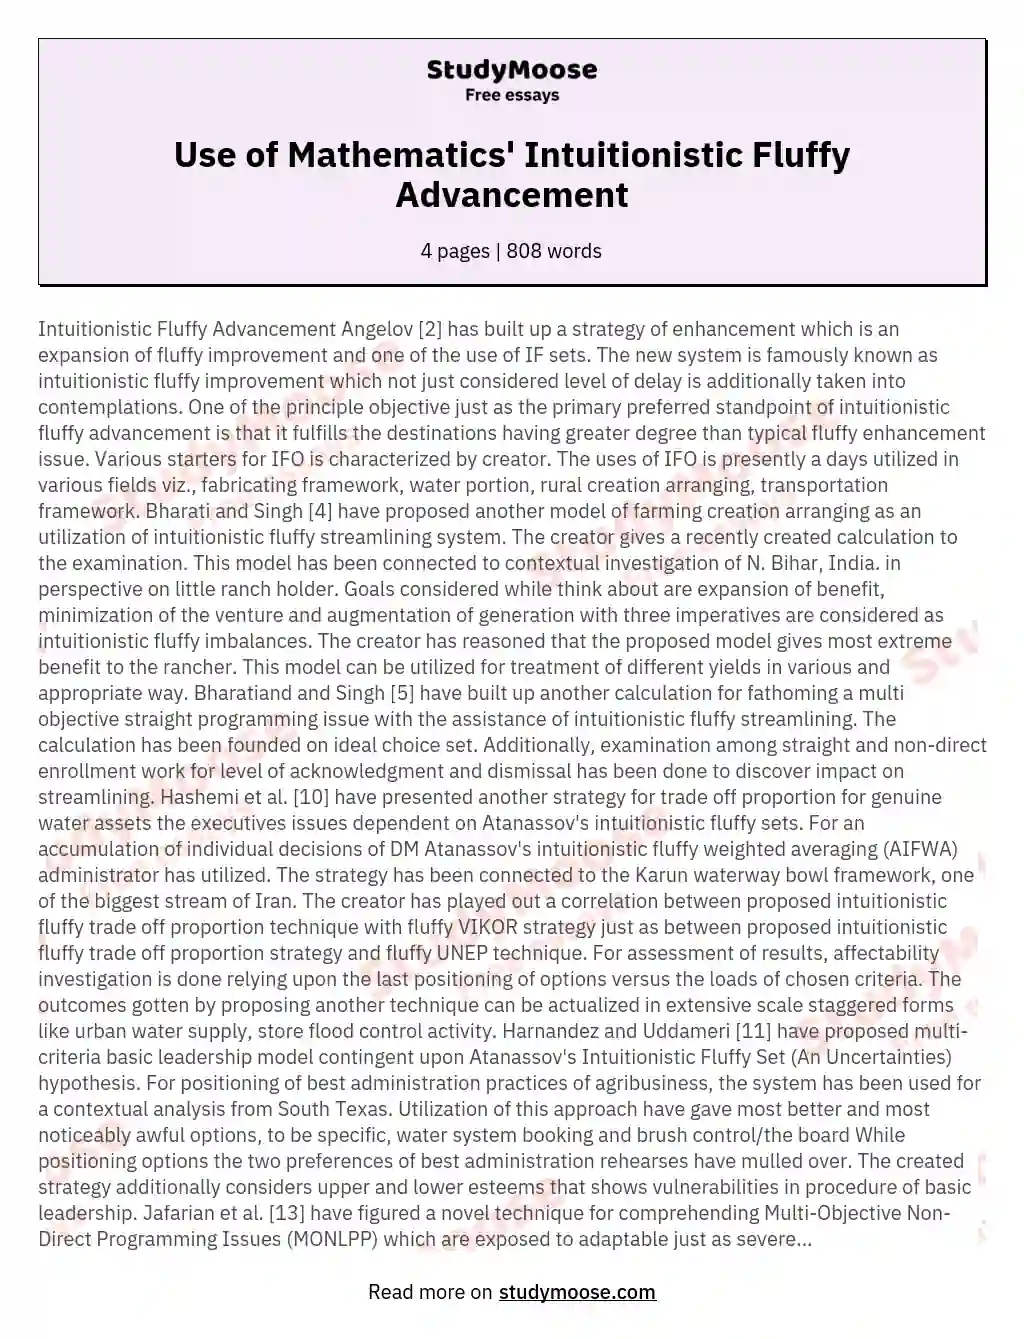 Use of Mathematics' Intuitionistic Fluffy Advancement essay